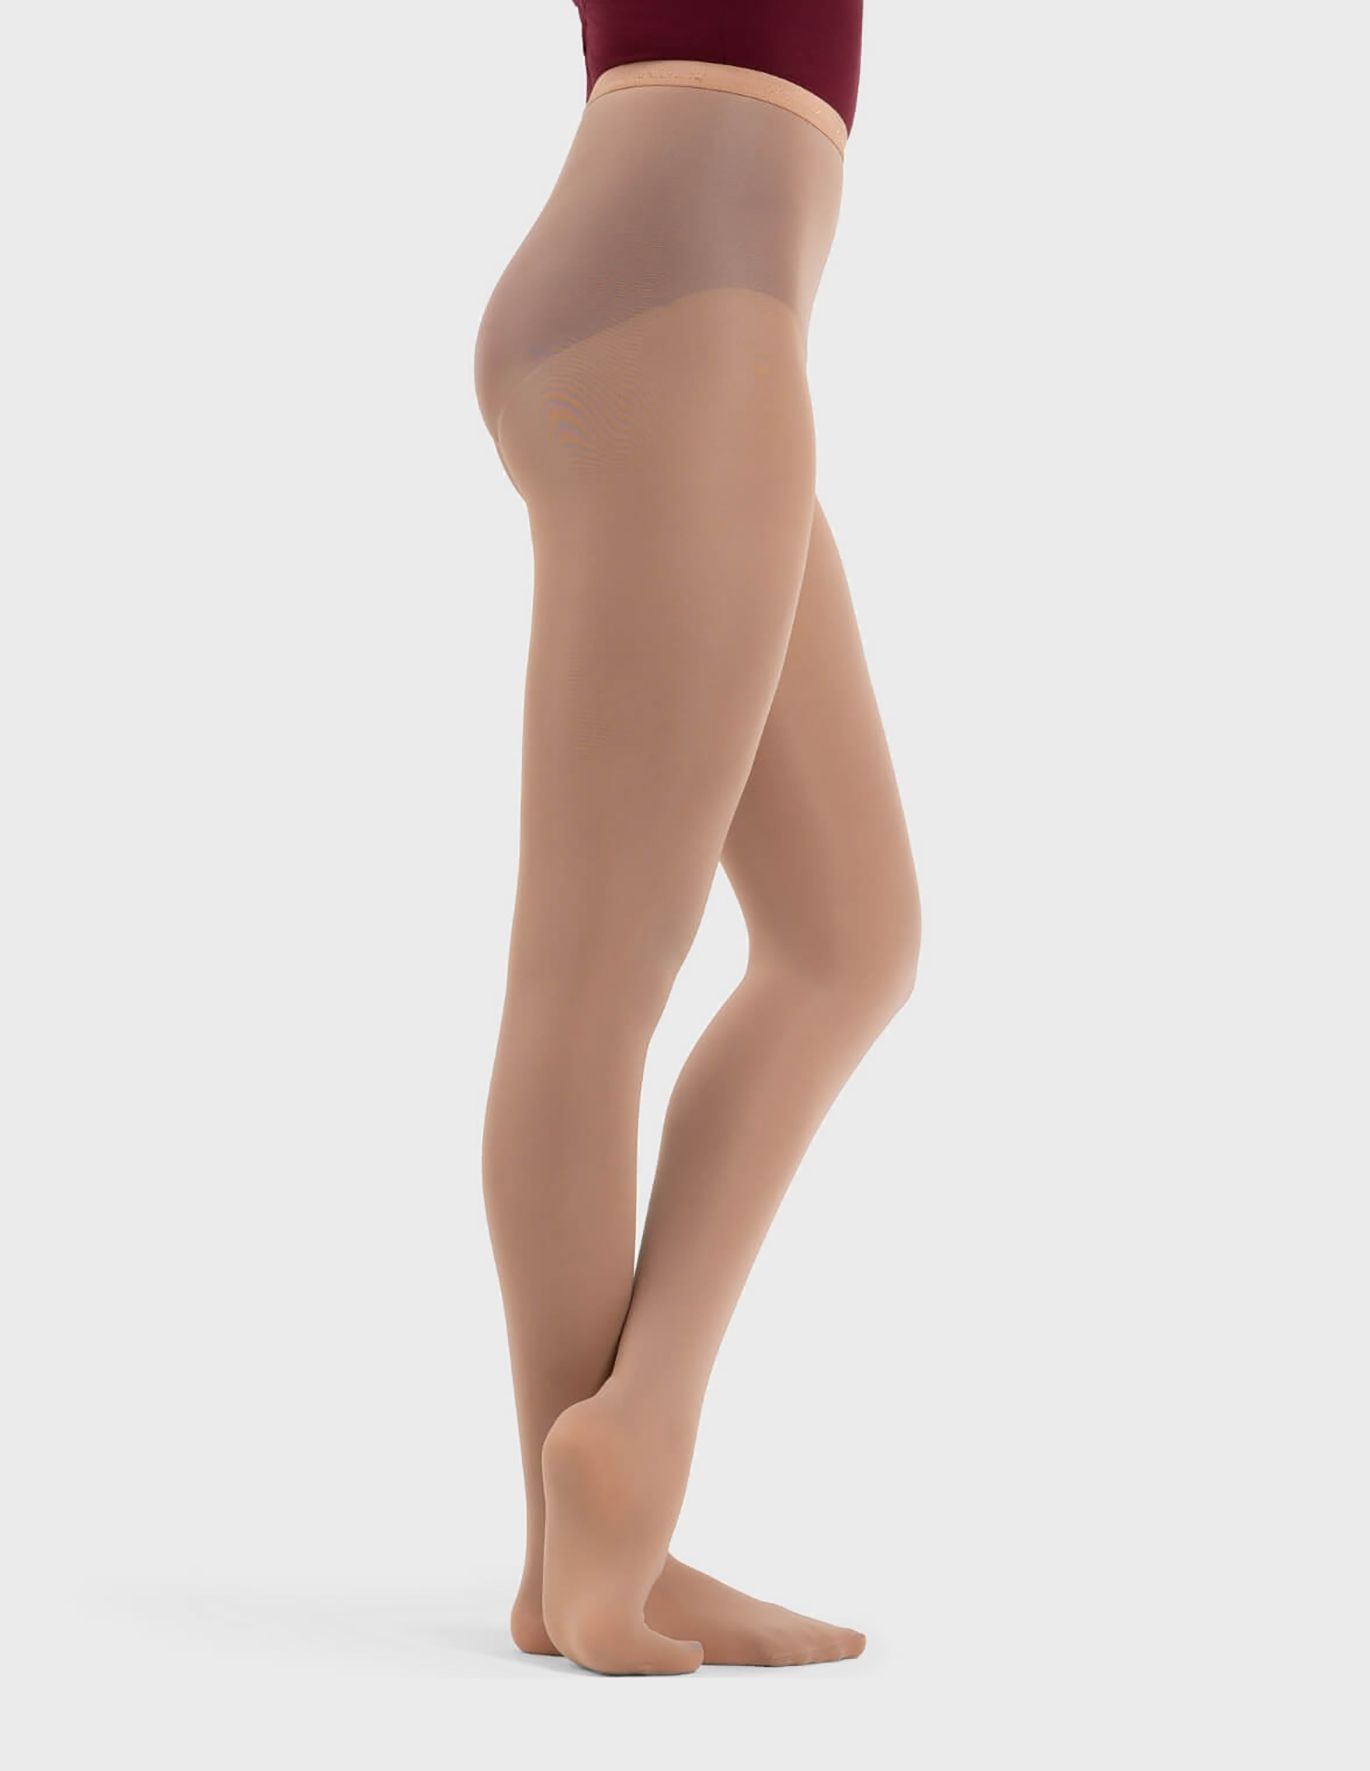 Capezio Hold & Stretch Footed Dance Tights Model N14